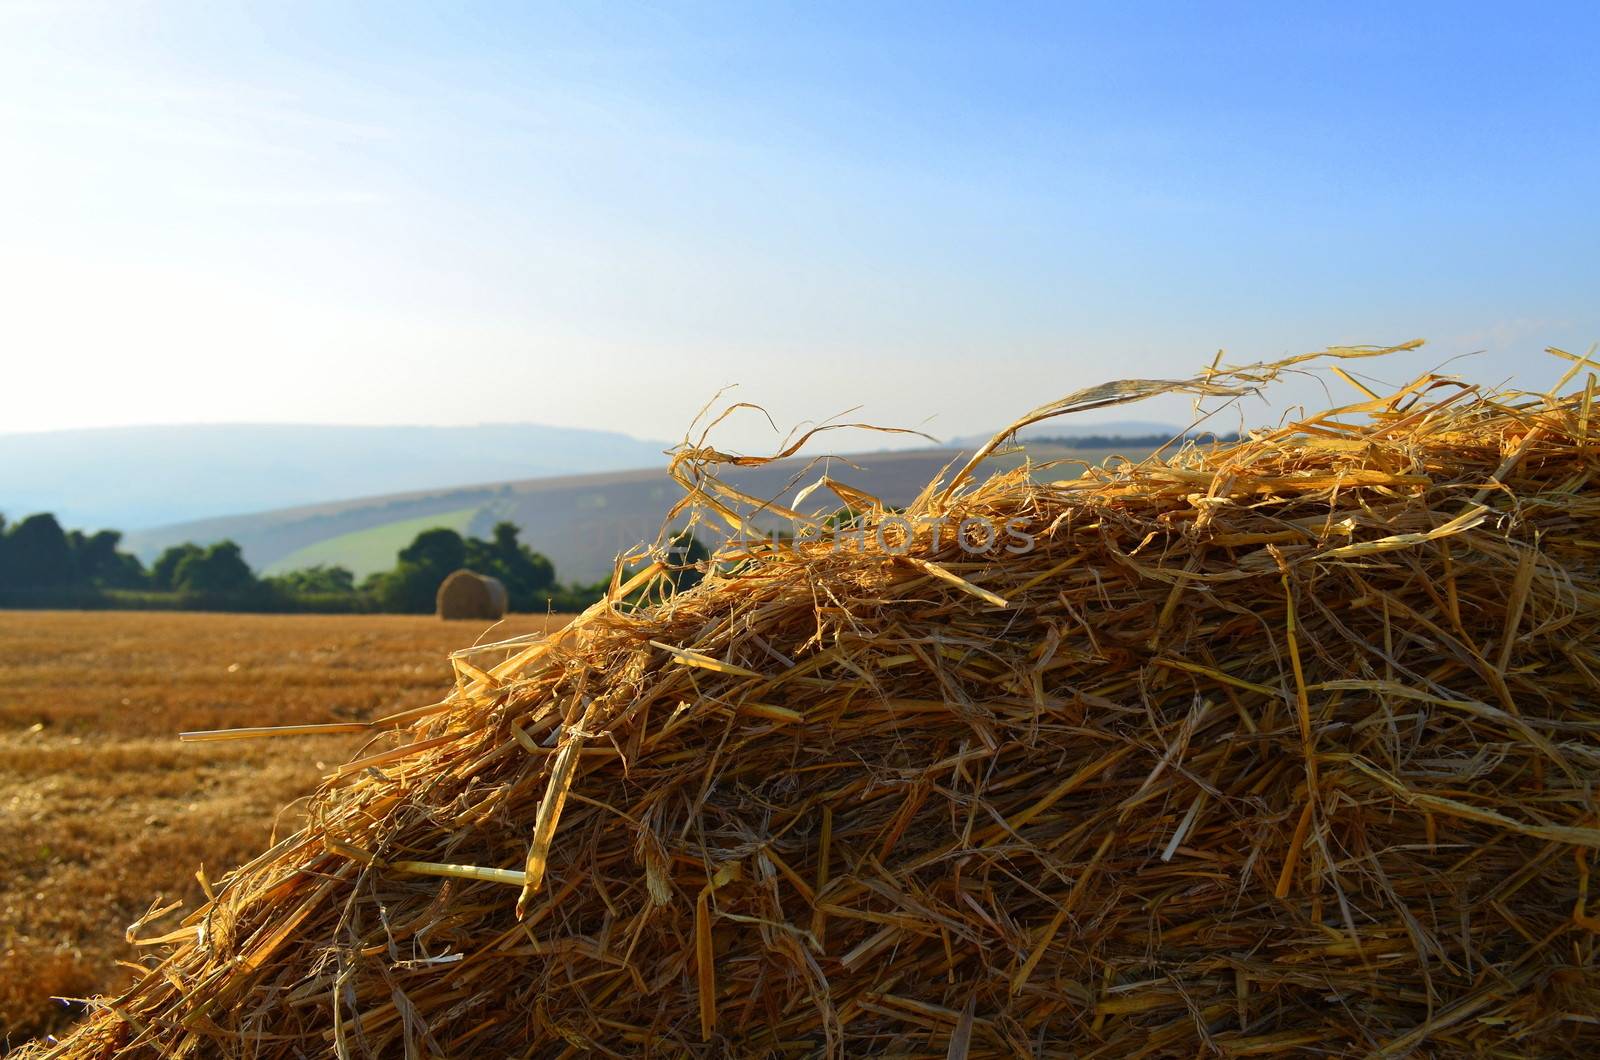 A close up shot of a round hay bale in a English hay field.